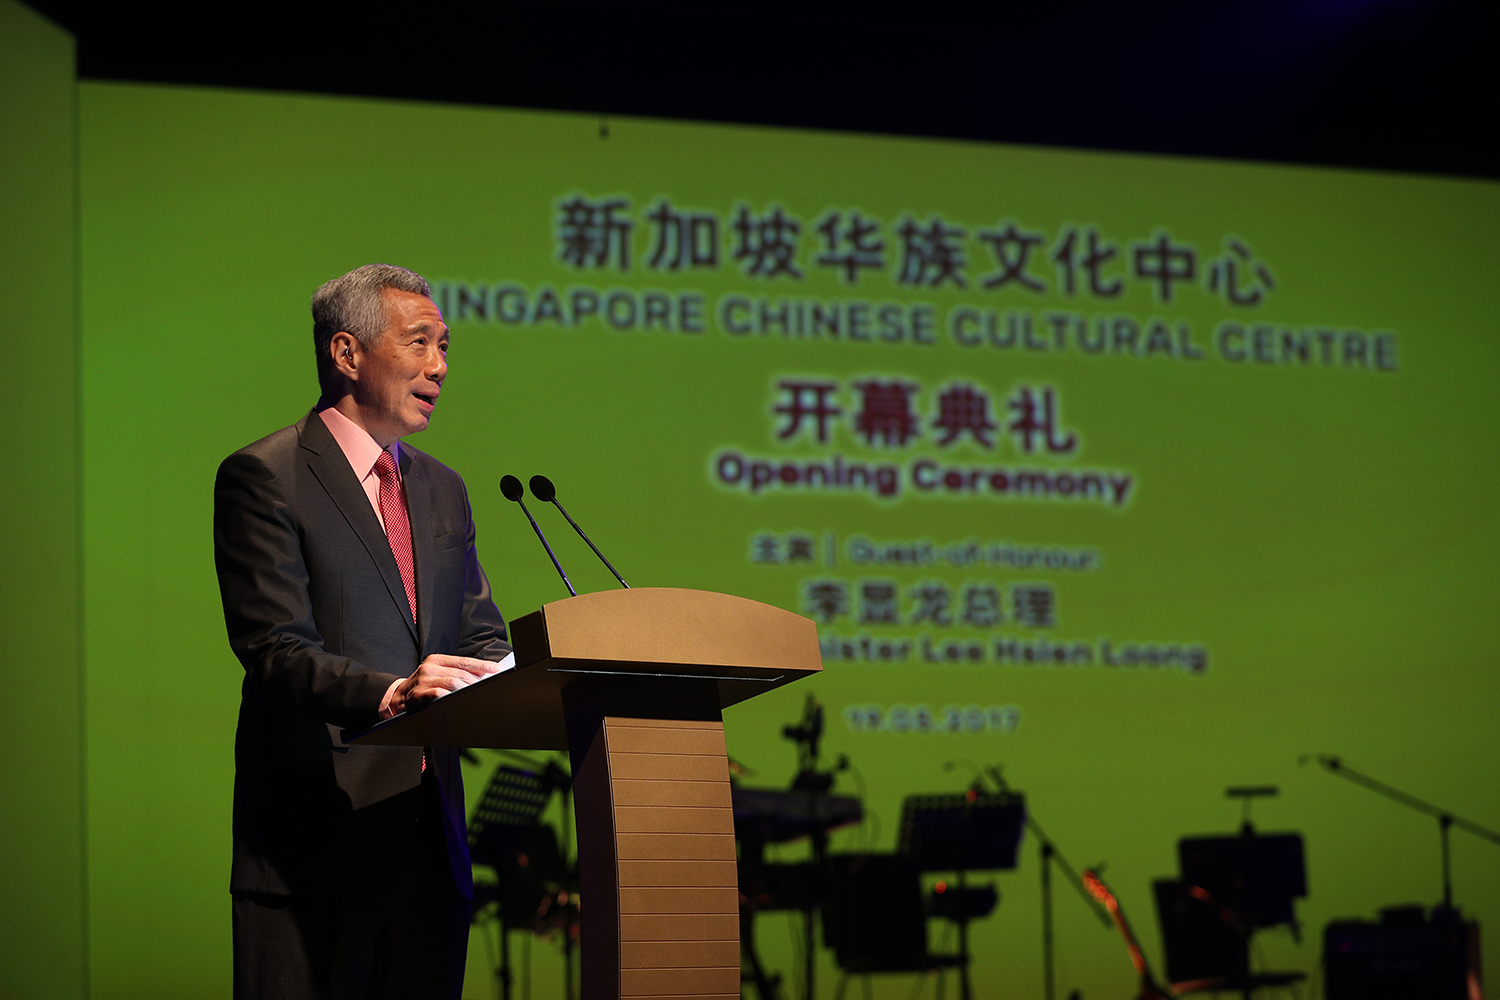 PM Lee Hsien Loong at the official opening of the Singapore Chinese Cultural Centre on 19 May 2017 (MCI Photo by Chwee)